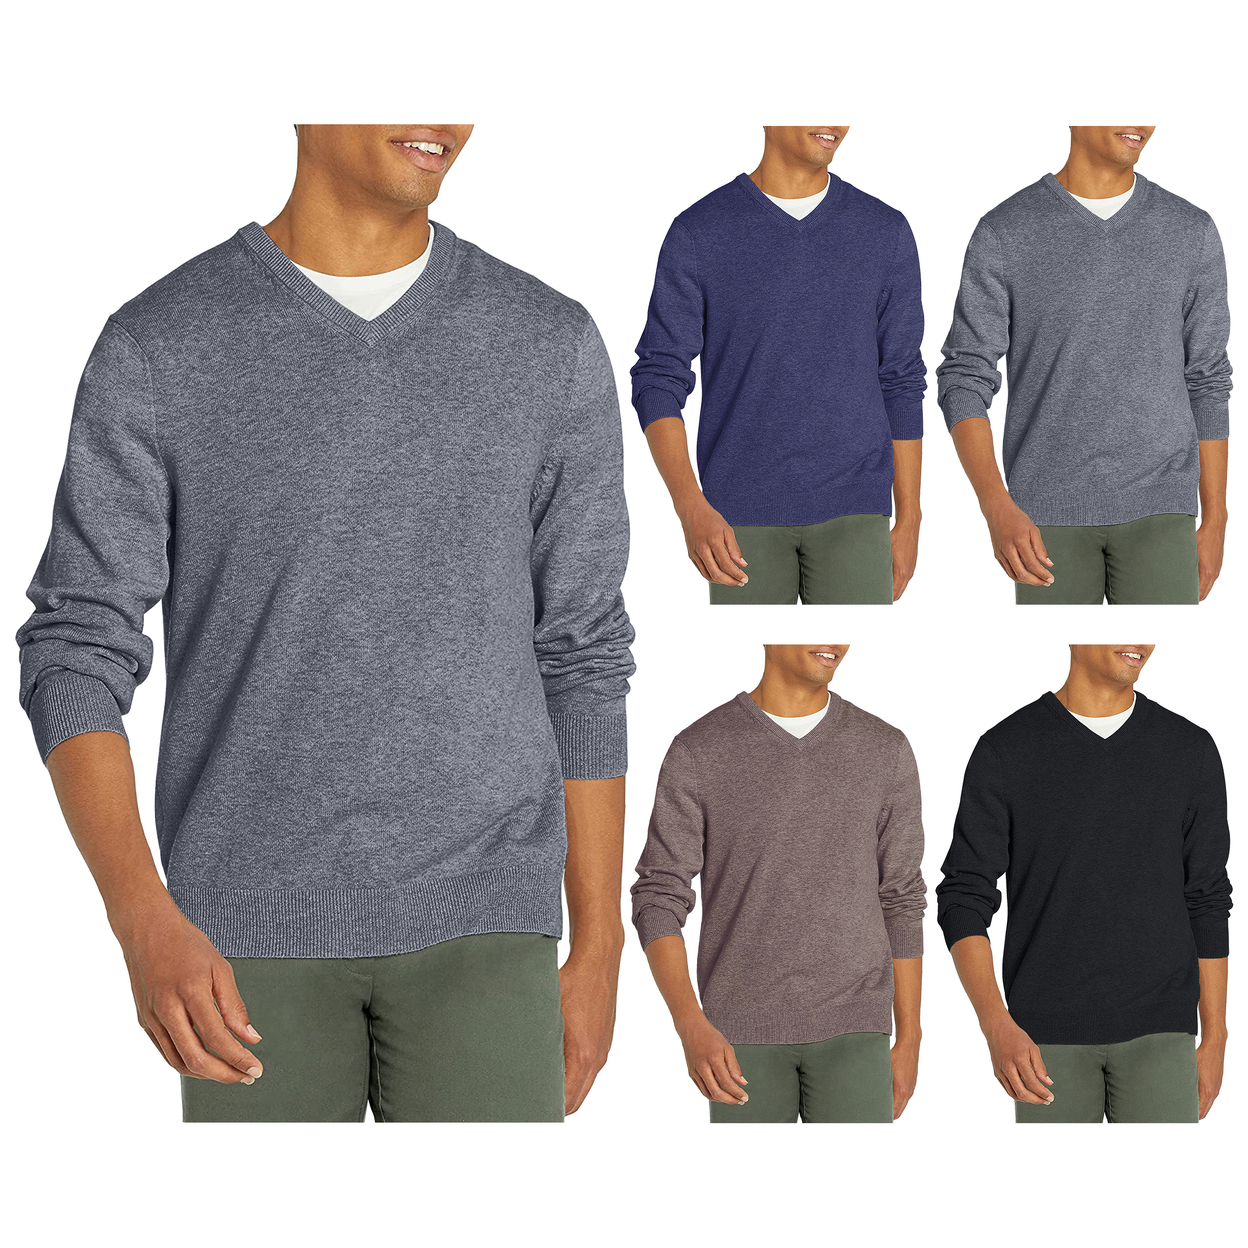 Men's Casual Ultra-Soft Slim Fit Warm Knit V-Neck Sweater - Grey, X-large